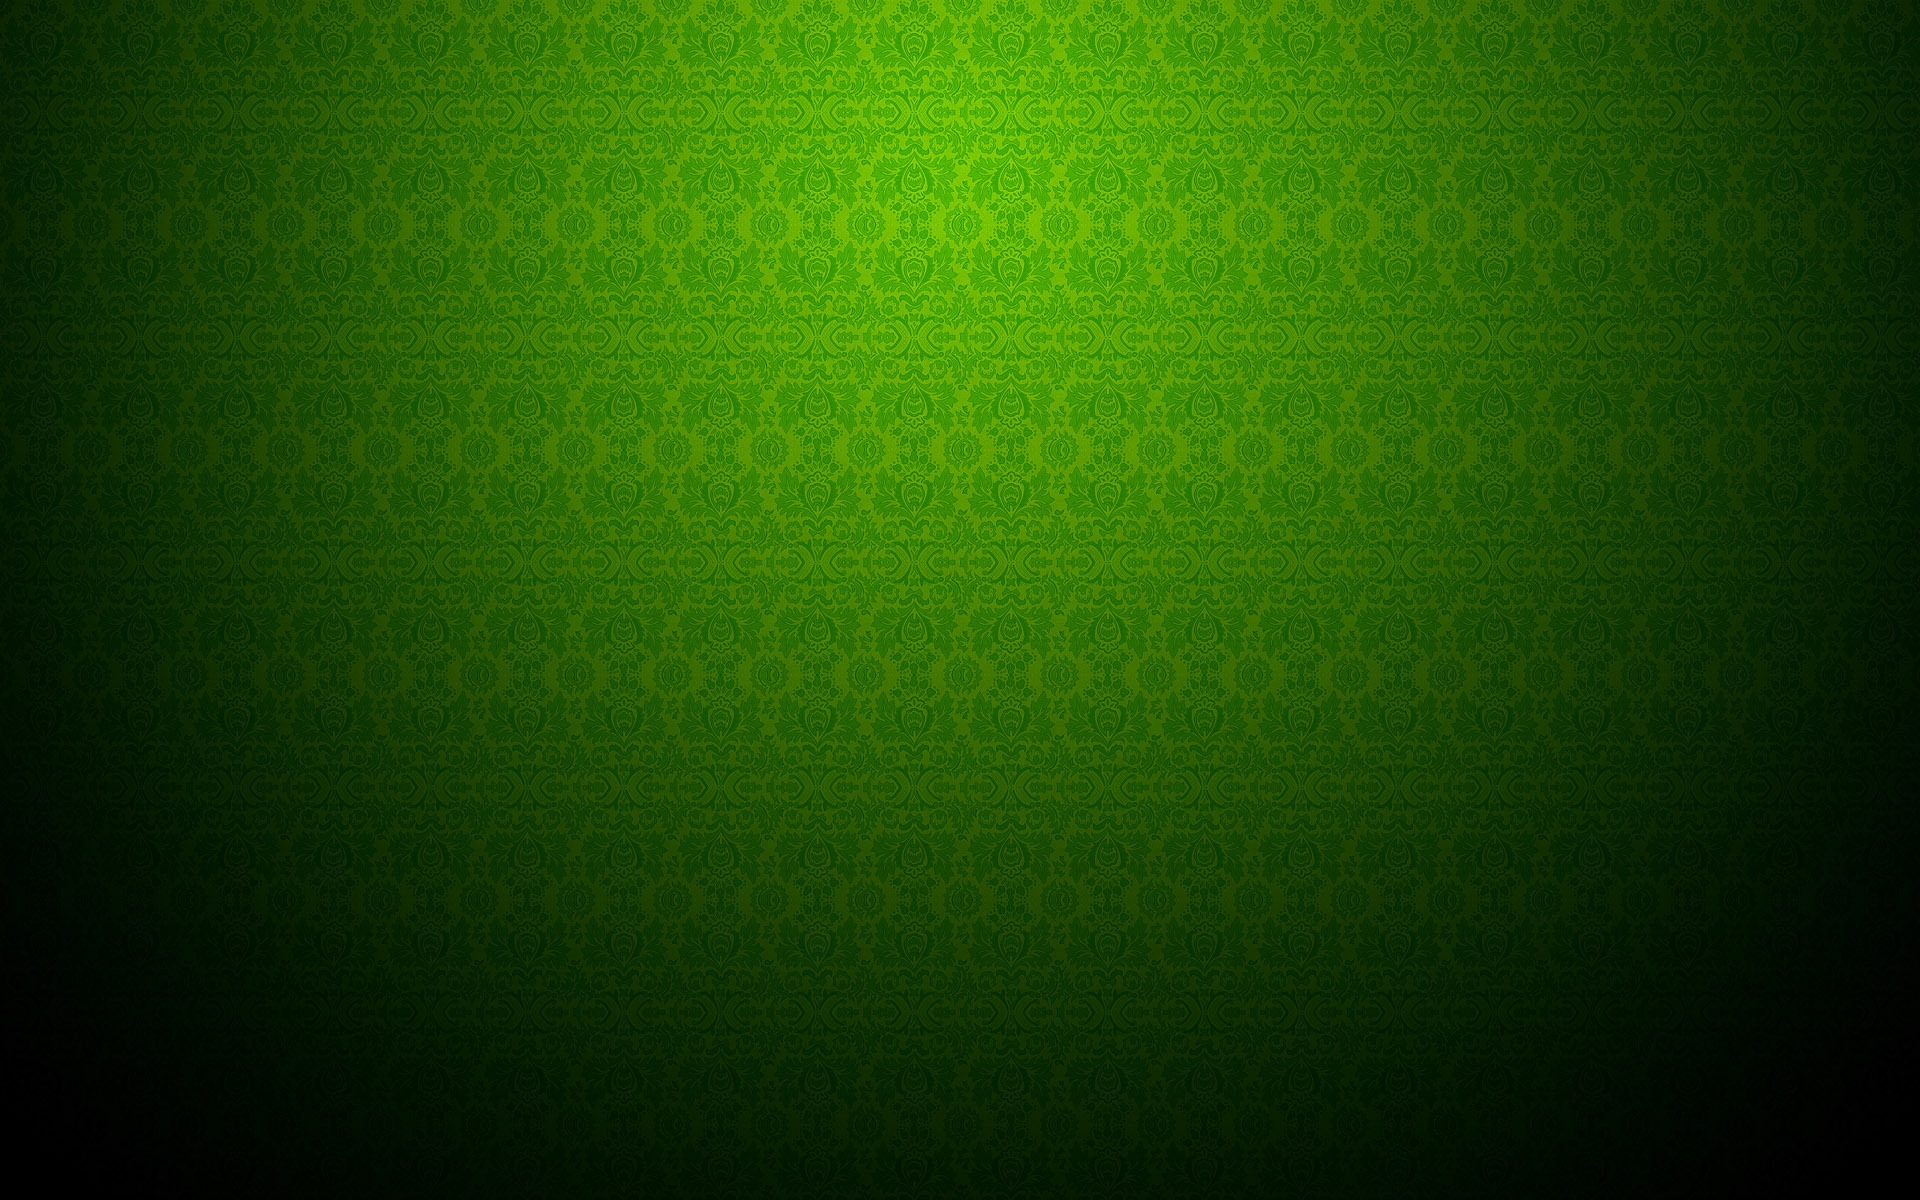 Wallpapers green background patterns surface on the desktop